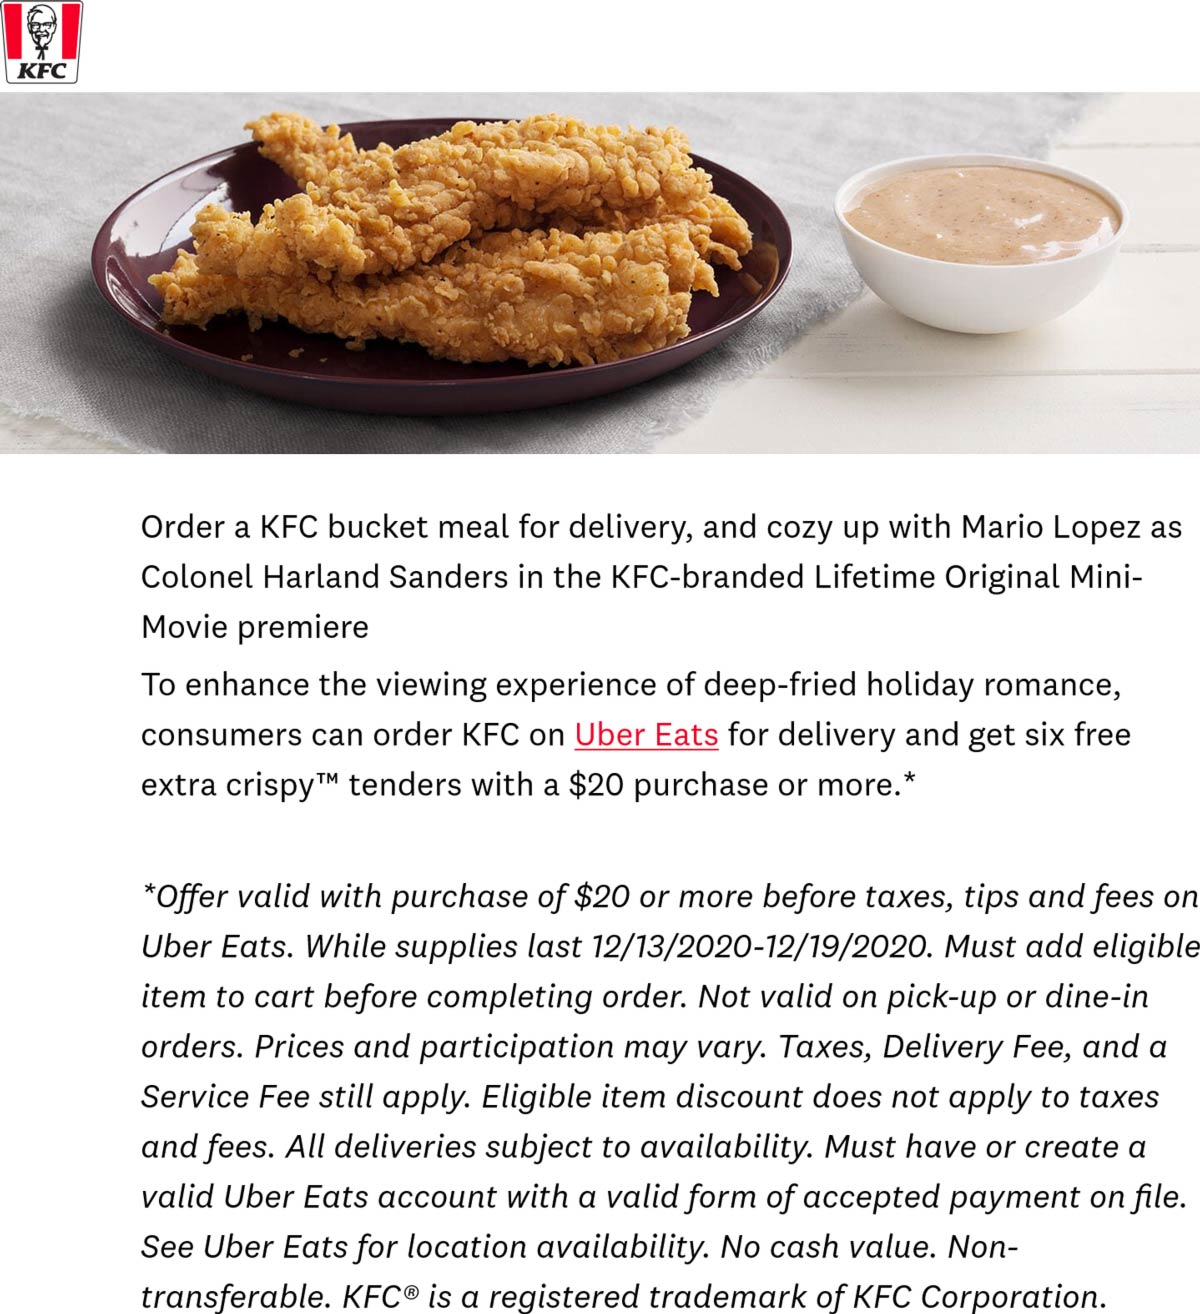 KFC restaurants Coupon  6pc tenders free with your $20 delivery bucket today at KFC #kfc 